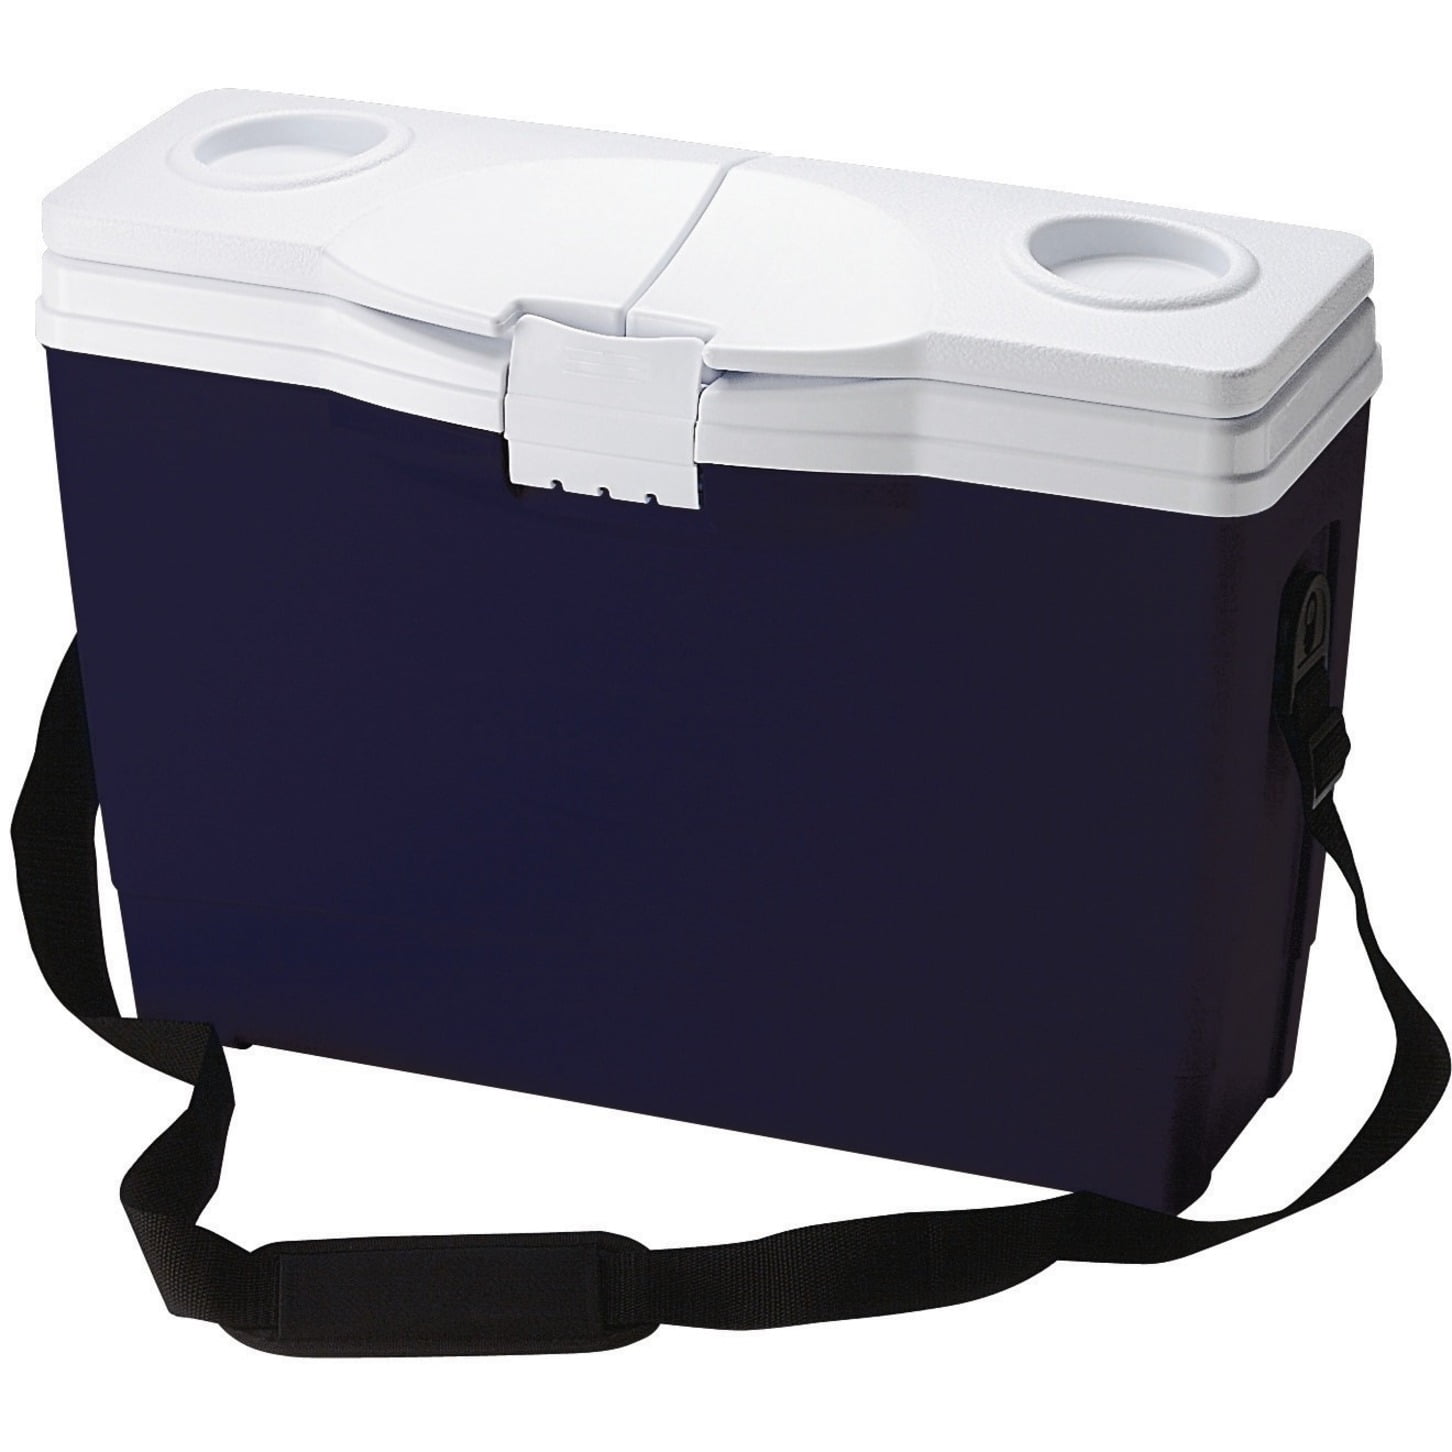 Rubbermaid RBMD 10 QT COOLER at